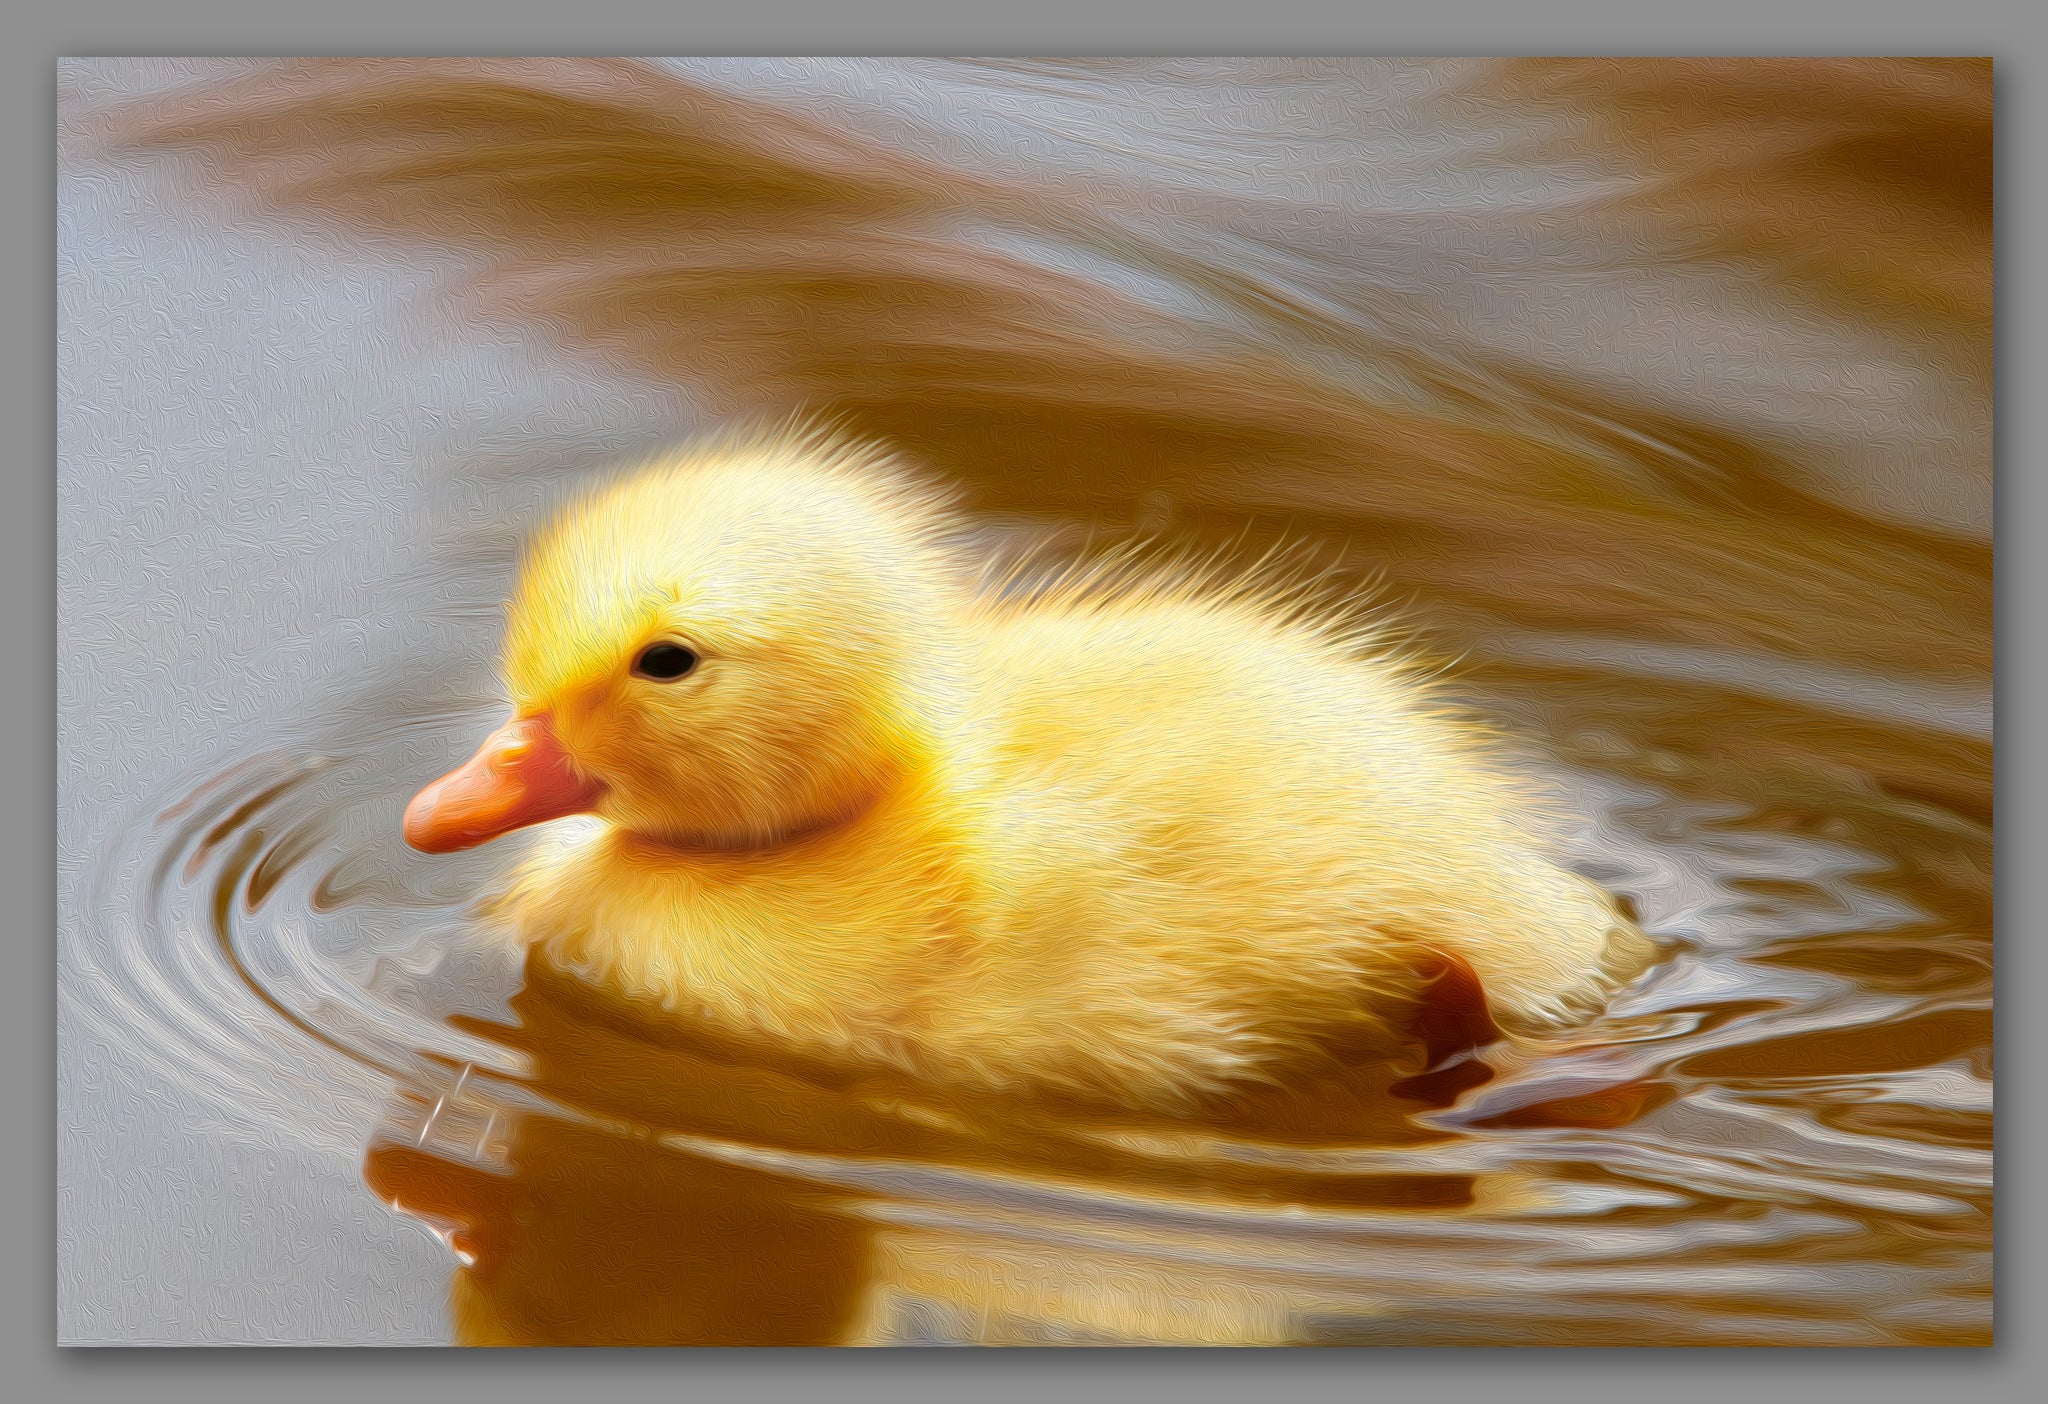 Not A Painting - Duckling #02